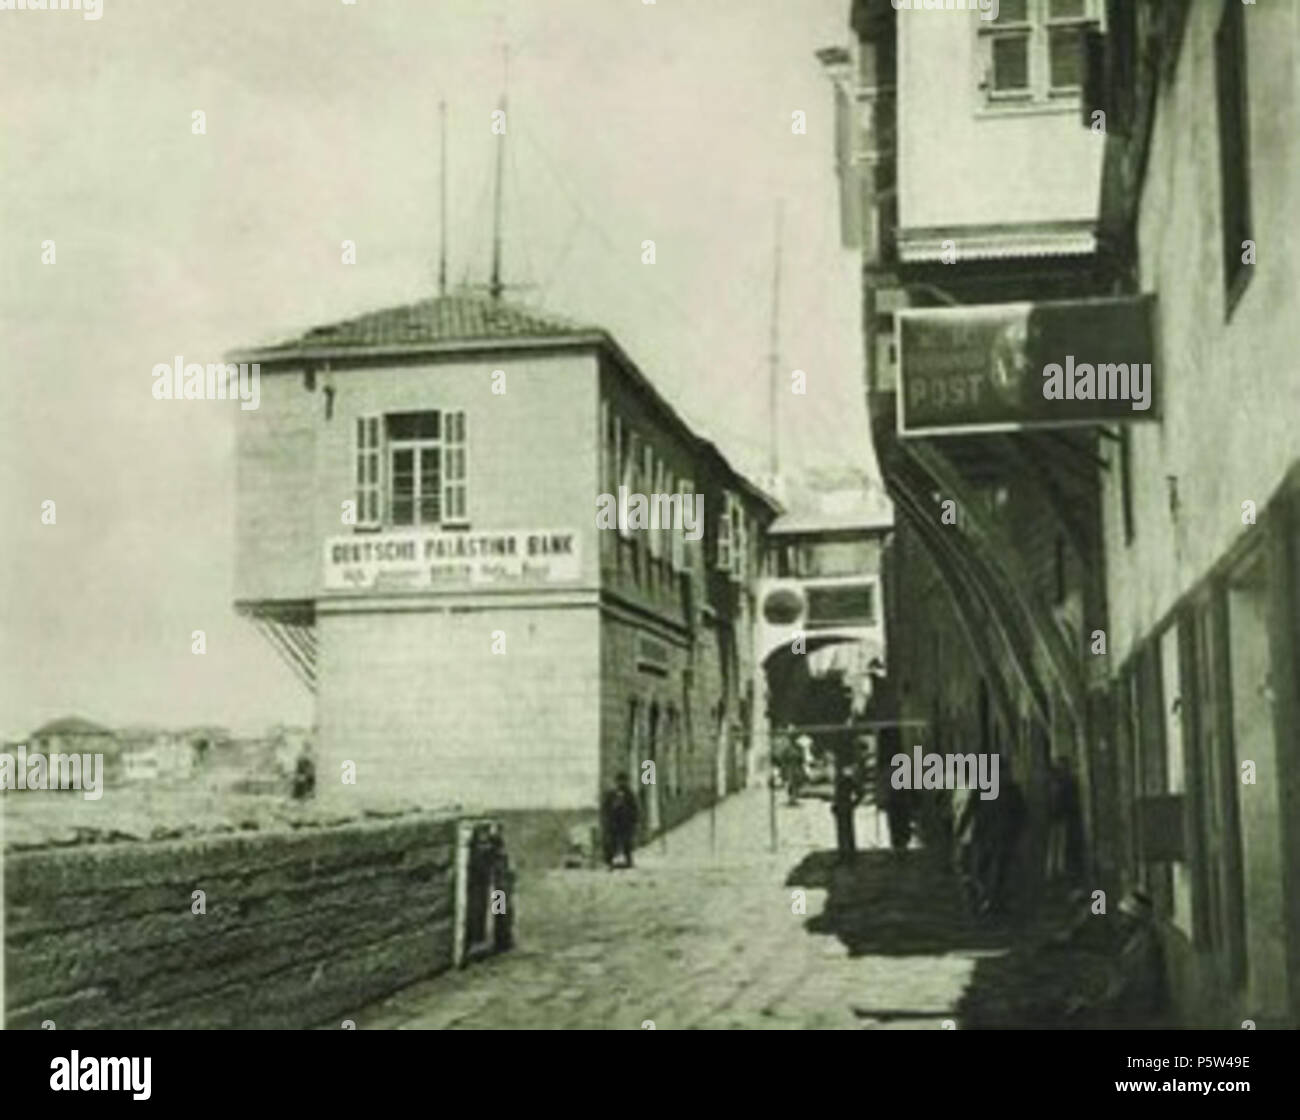 N/A. English: Branch of the Deutsche Palastina Bank in Jaffa (Haifa) before WWI. On the right, the sign of the Austrian post office (K. K. Österreichische Post) is visible. Austria had been the first, among a handful of Western countries, to open and operate post offices throughout the Ottoman Empire. From a book of 26 sepia photographs published by the Deutsche Palastina Bank before WW1. 16 August 2014, 13:54:33. DEUTSCHE PALASTINA-BANK, pre-WW1 444 Deutsche Palastina-Bank Jaffa Stock Photo